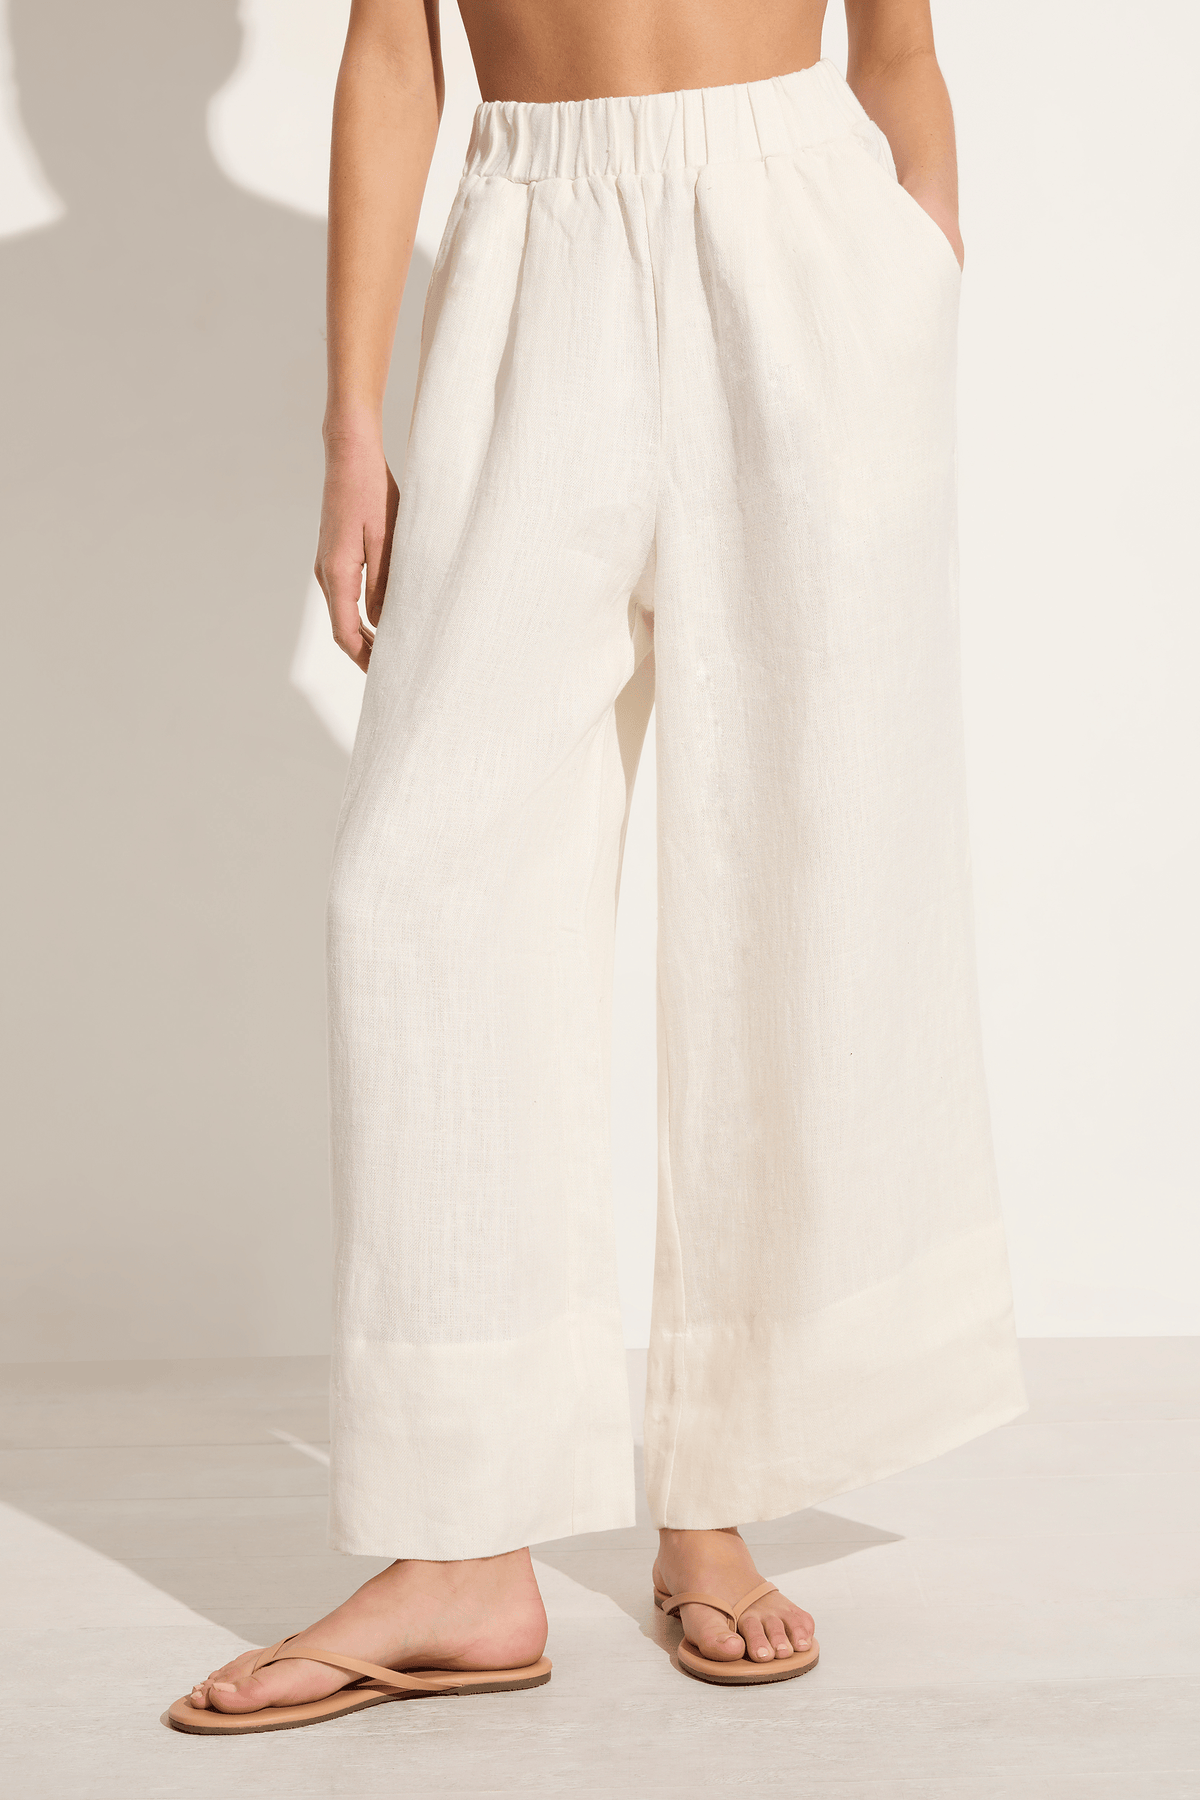 Mikoh Encino tailored pant